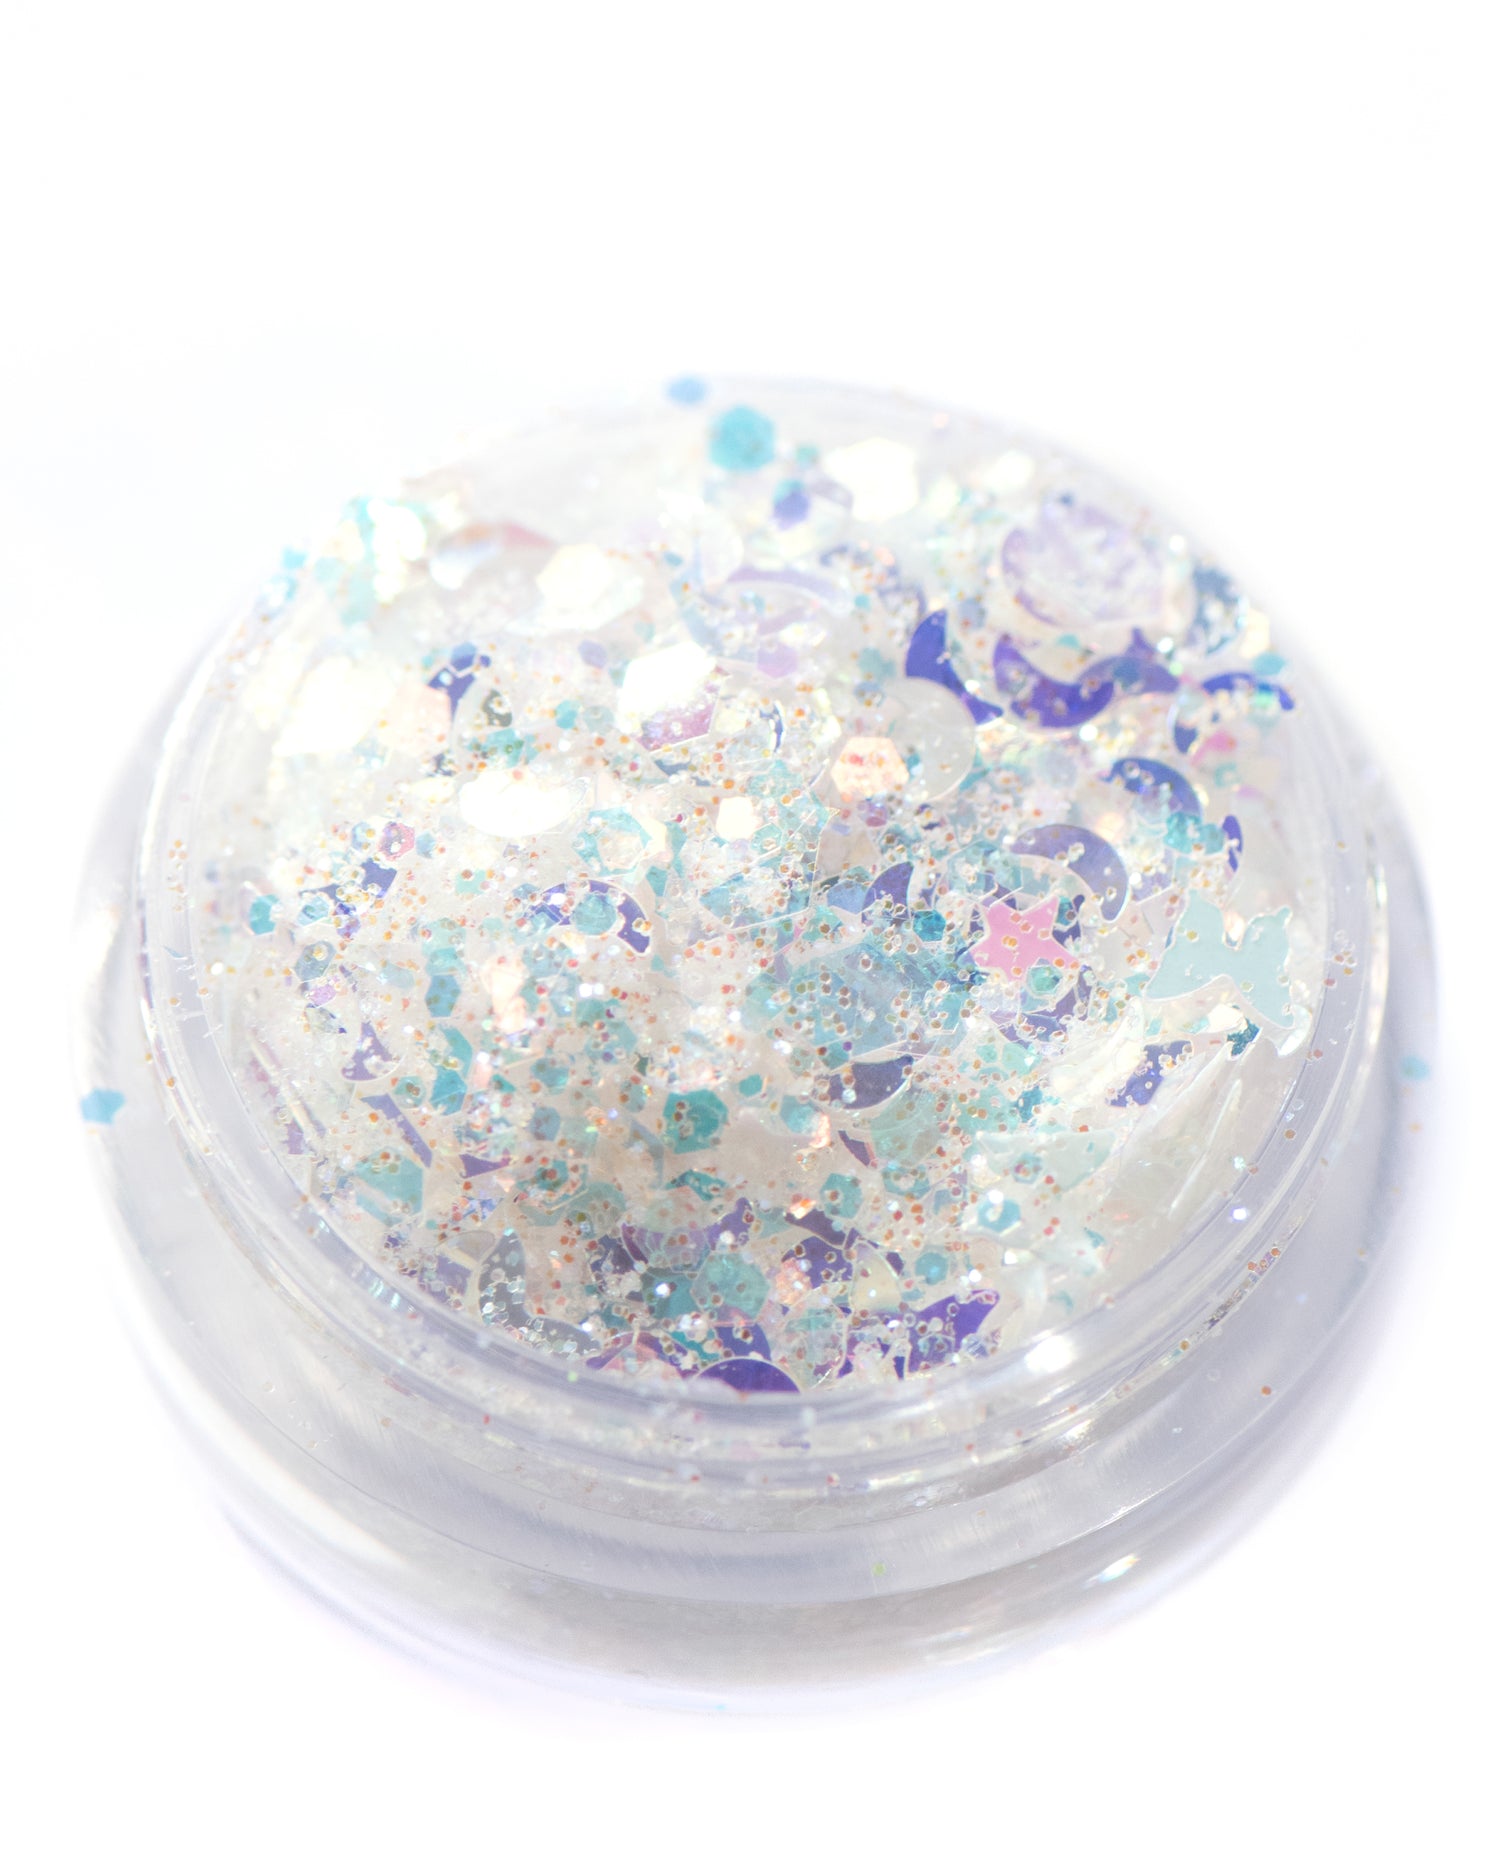 Moon Beams - Iridescent Chunky Glitter Mix with Moons and Stars - Lunautics Chunky Glitter